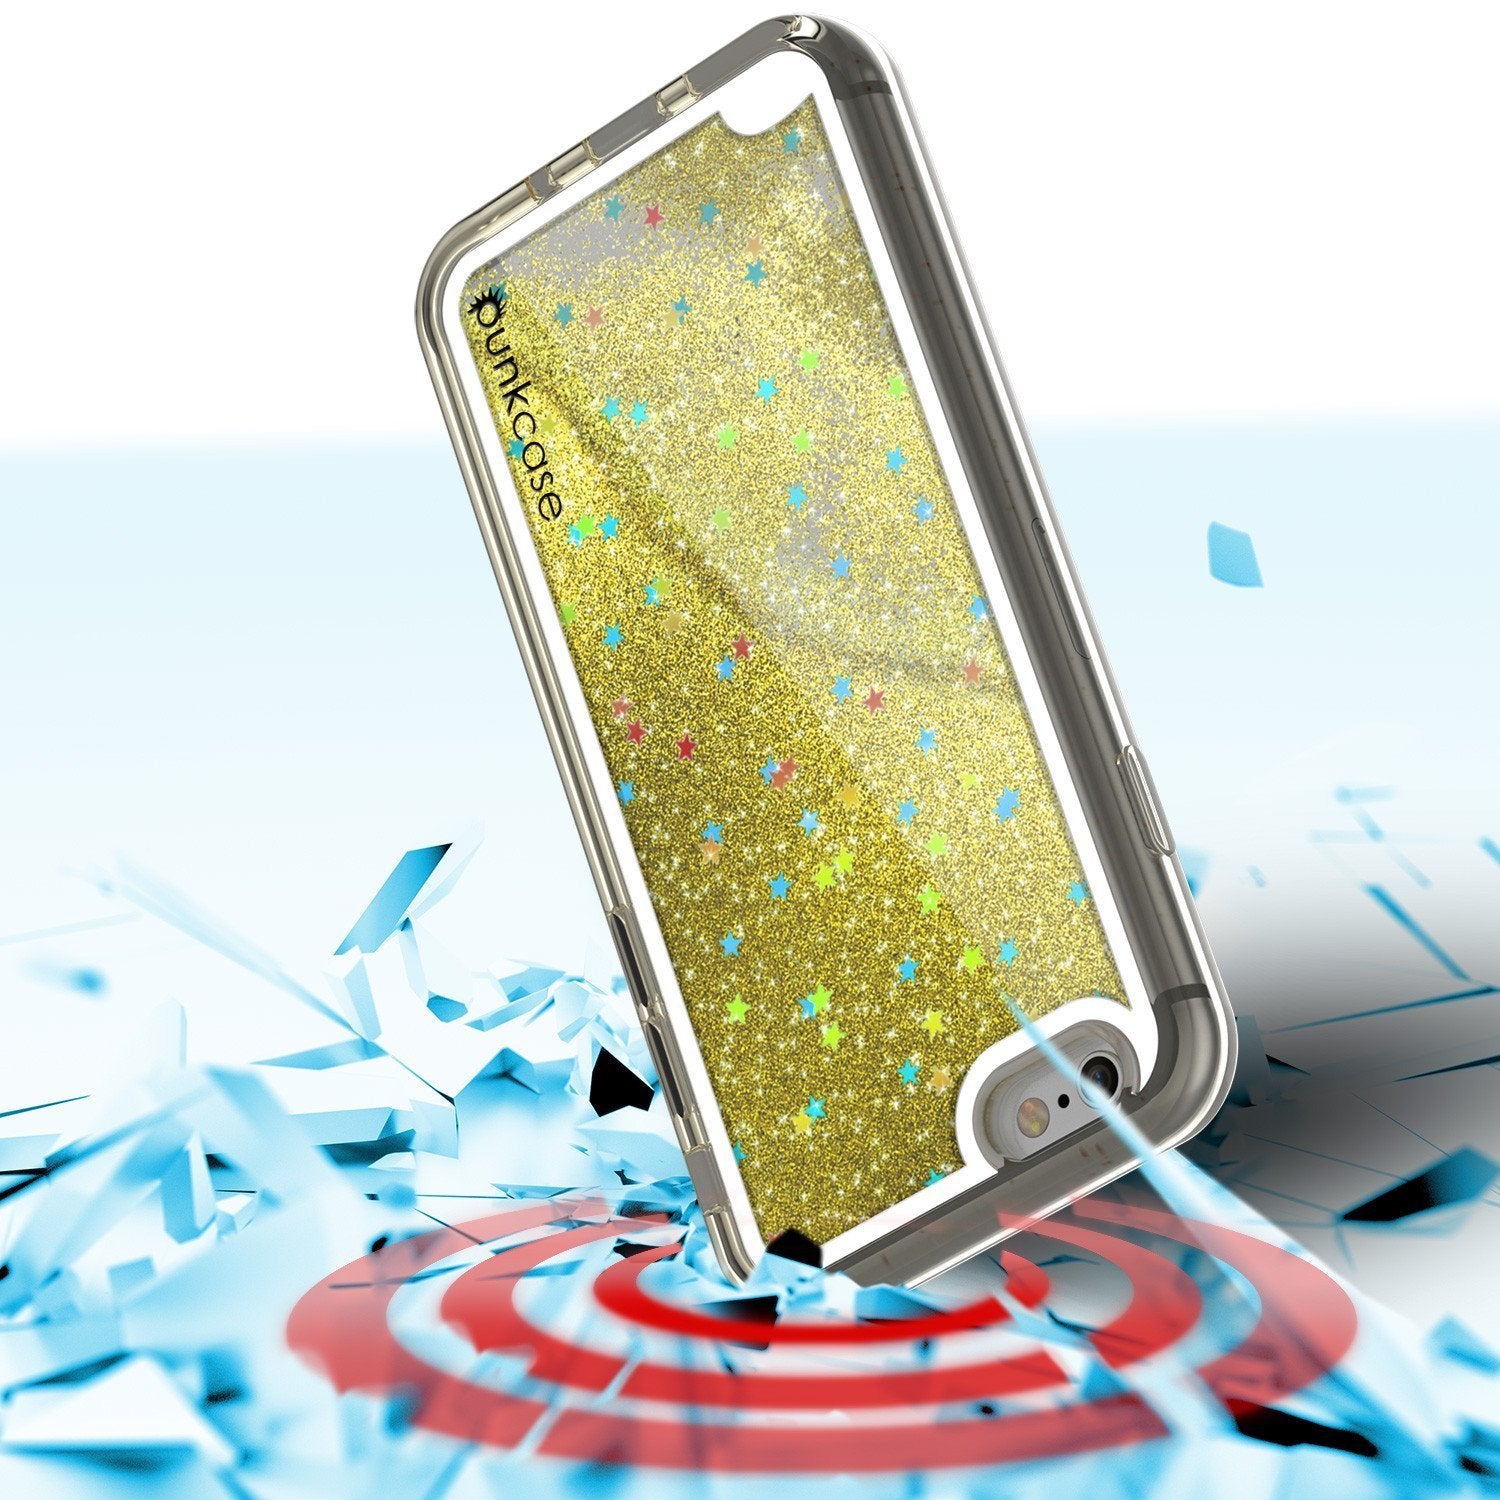 iPhone SE (4.7") Case, PunkCase LIQUID Gold Series, Protective Dual Layer Floating Glitter Cover